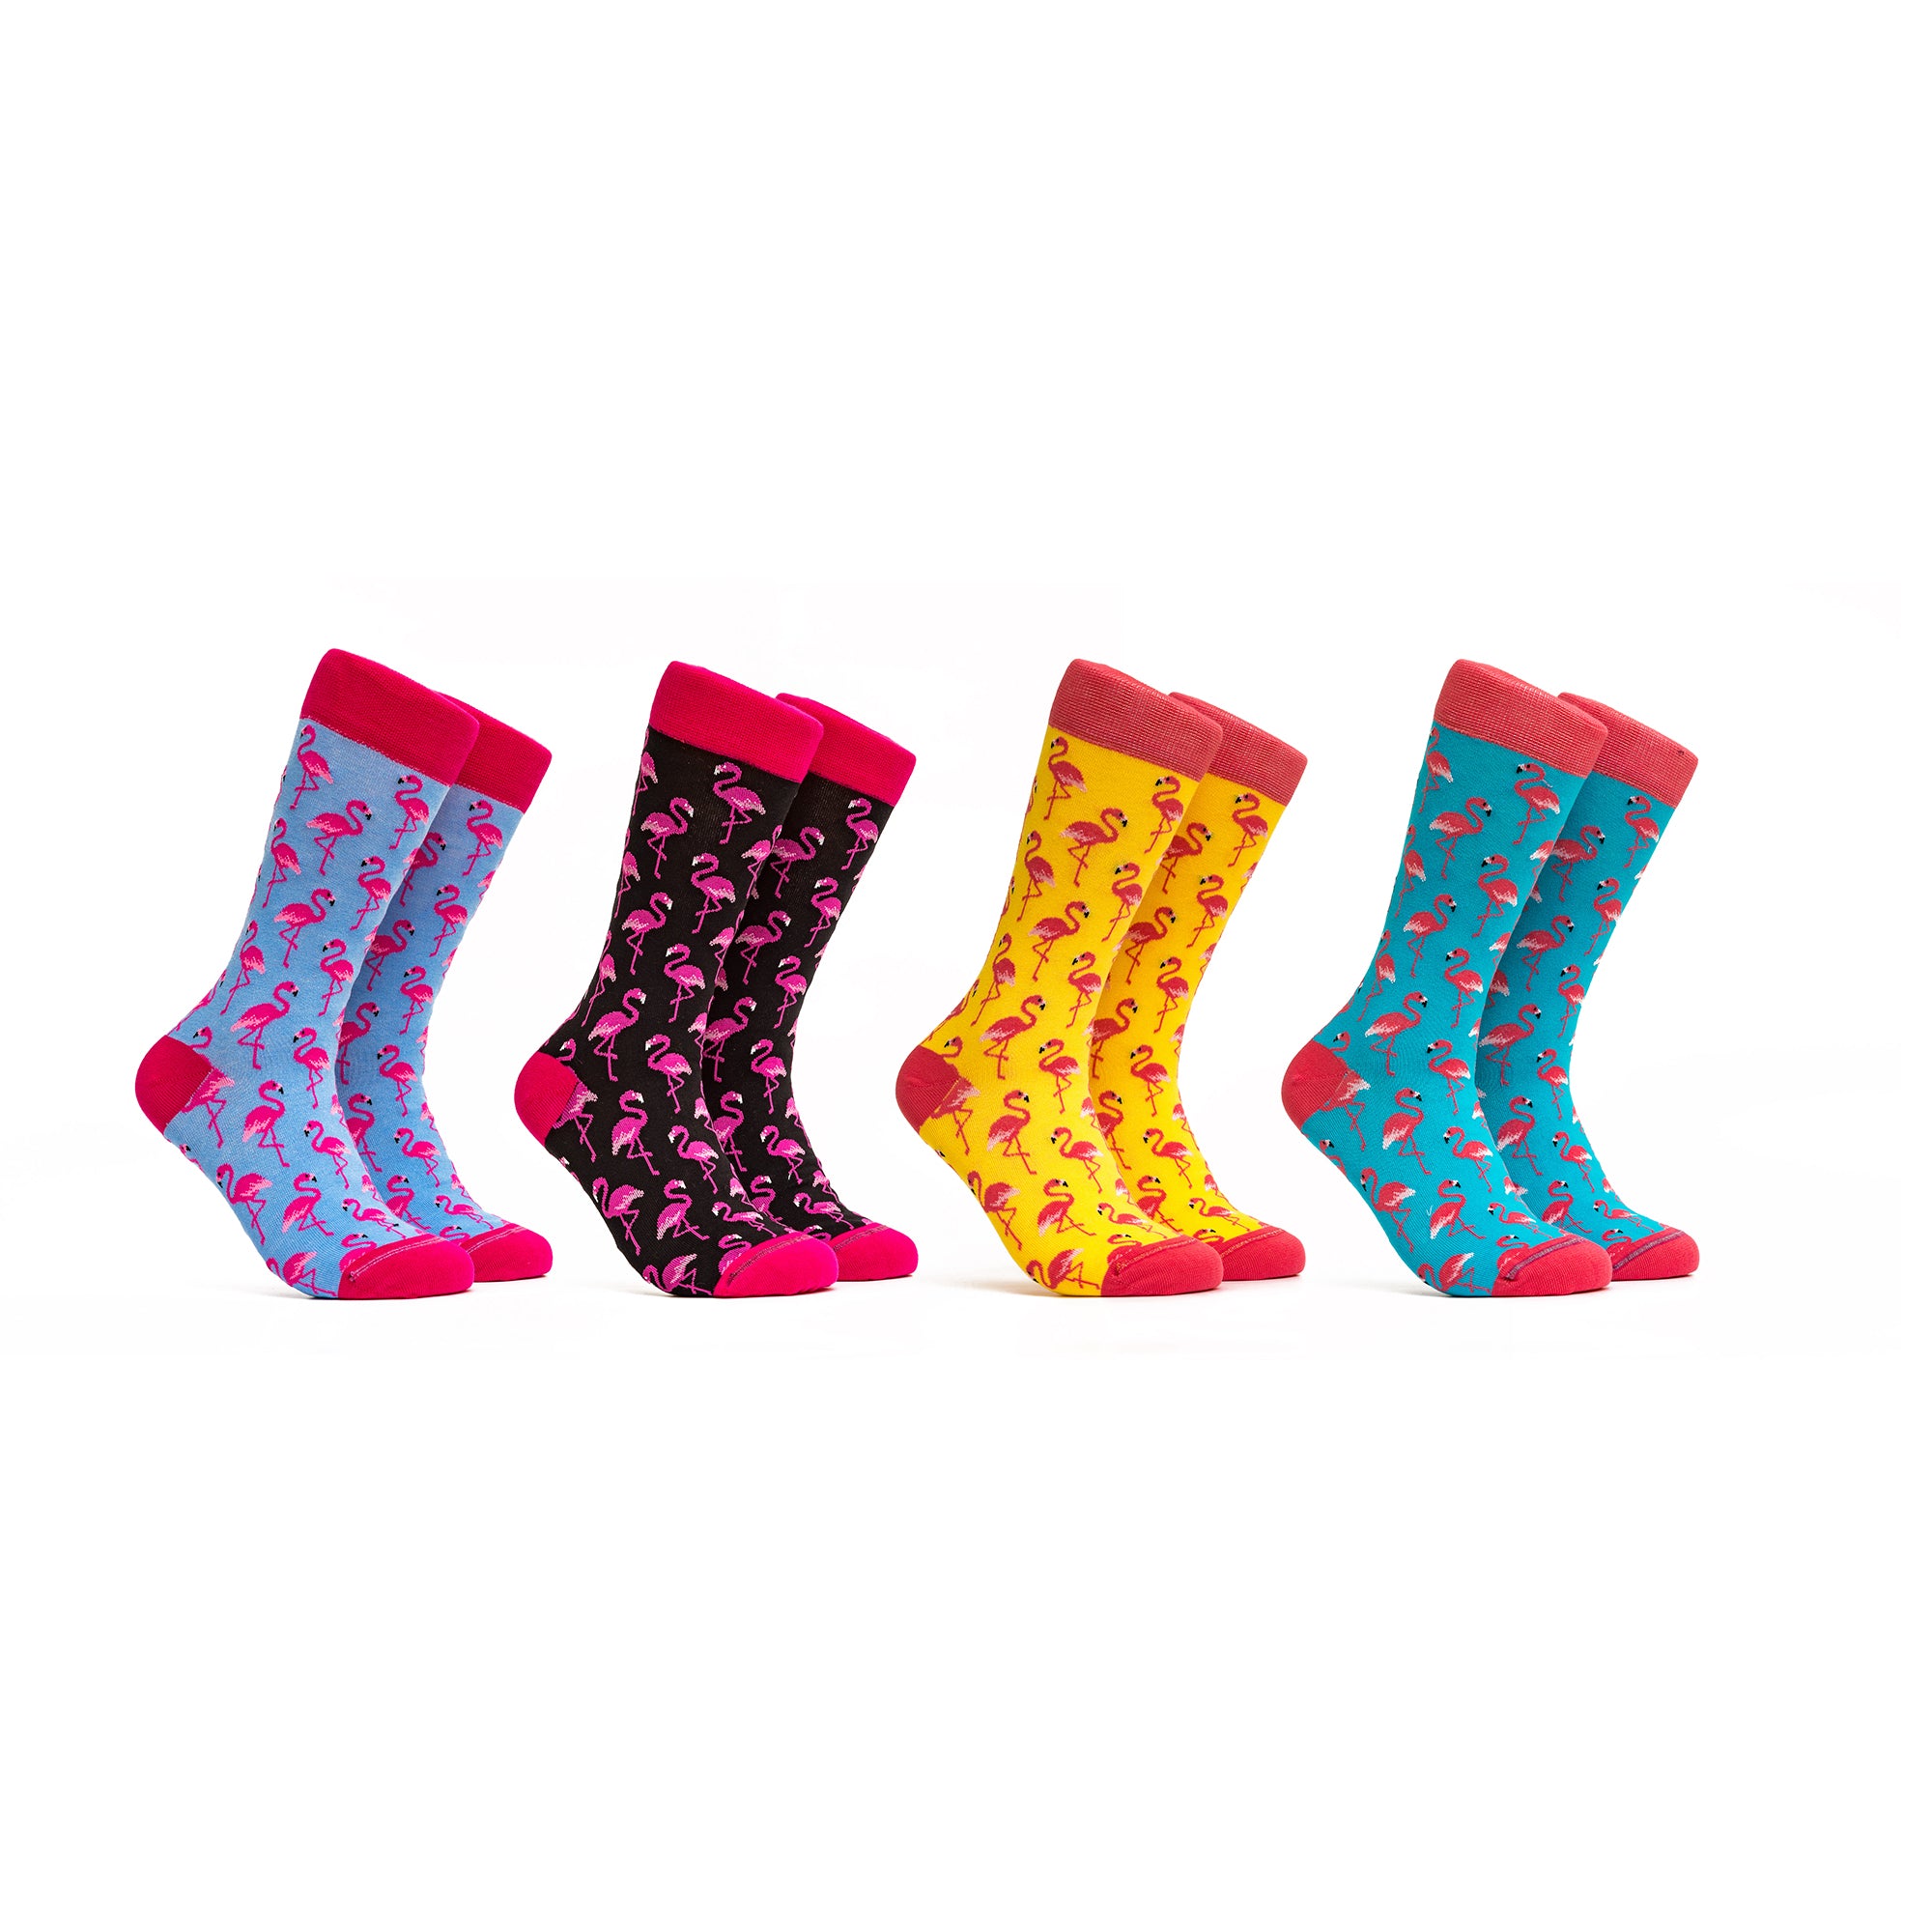 Flamingo Combo - Colors Yellow, Turquoise, Black and Blue - 4 Pairs